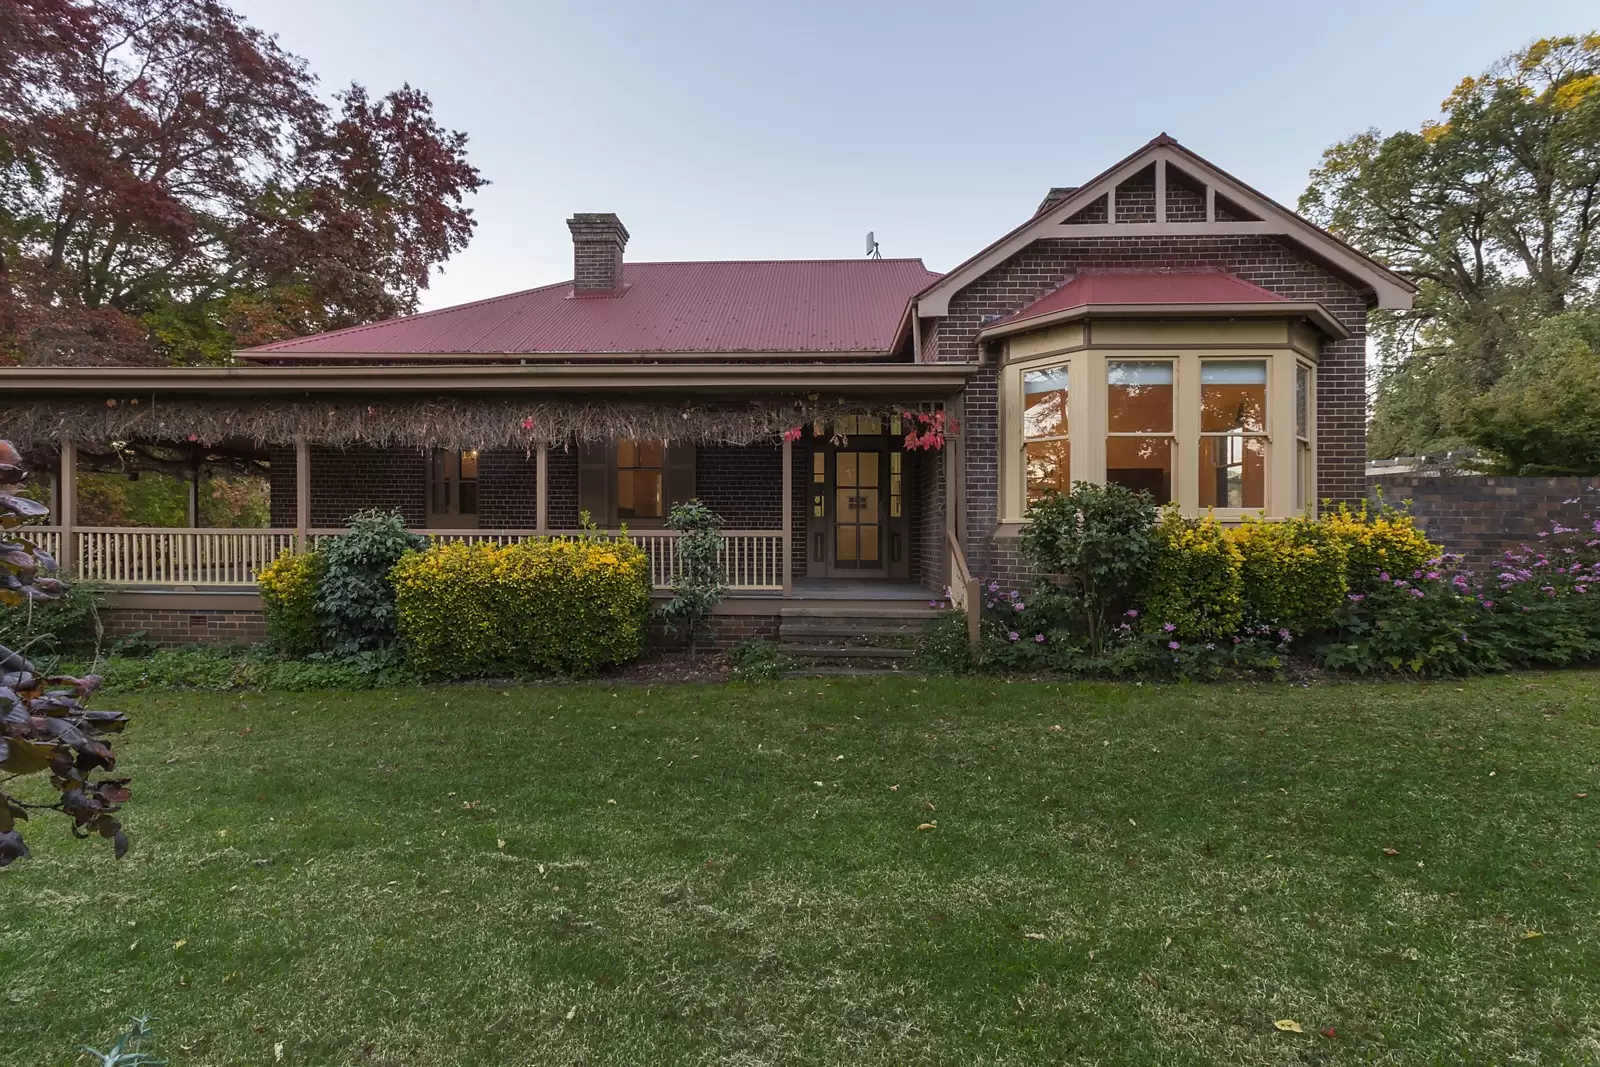 Photo #4: 525 Cluny Road, Armidale - Sold by Sydney Sotheby's International Realty